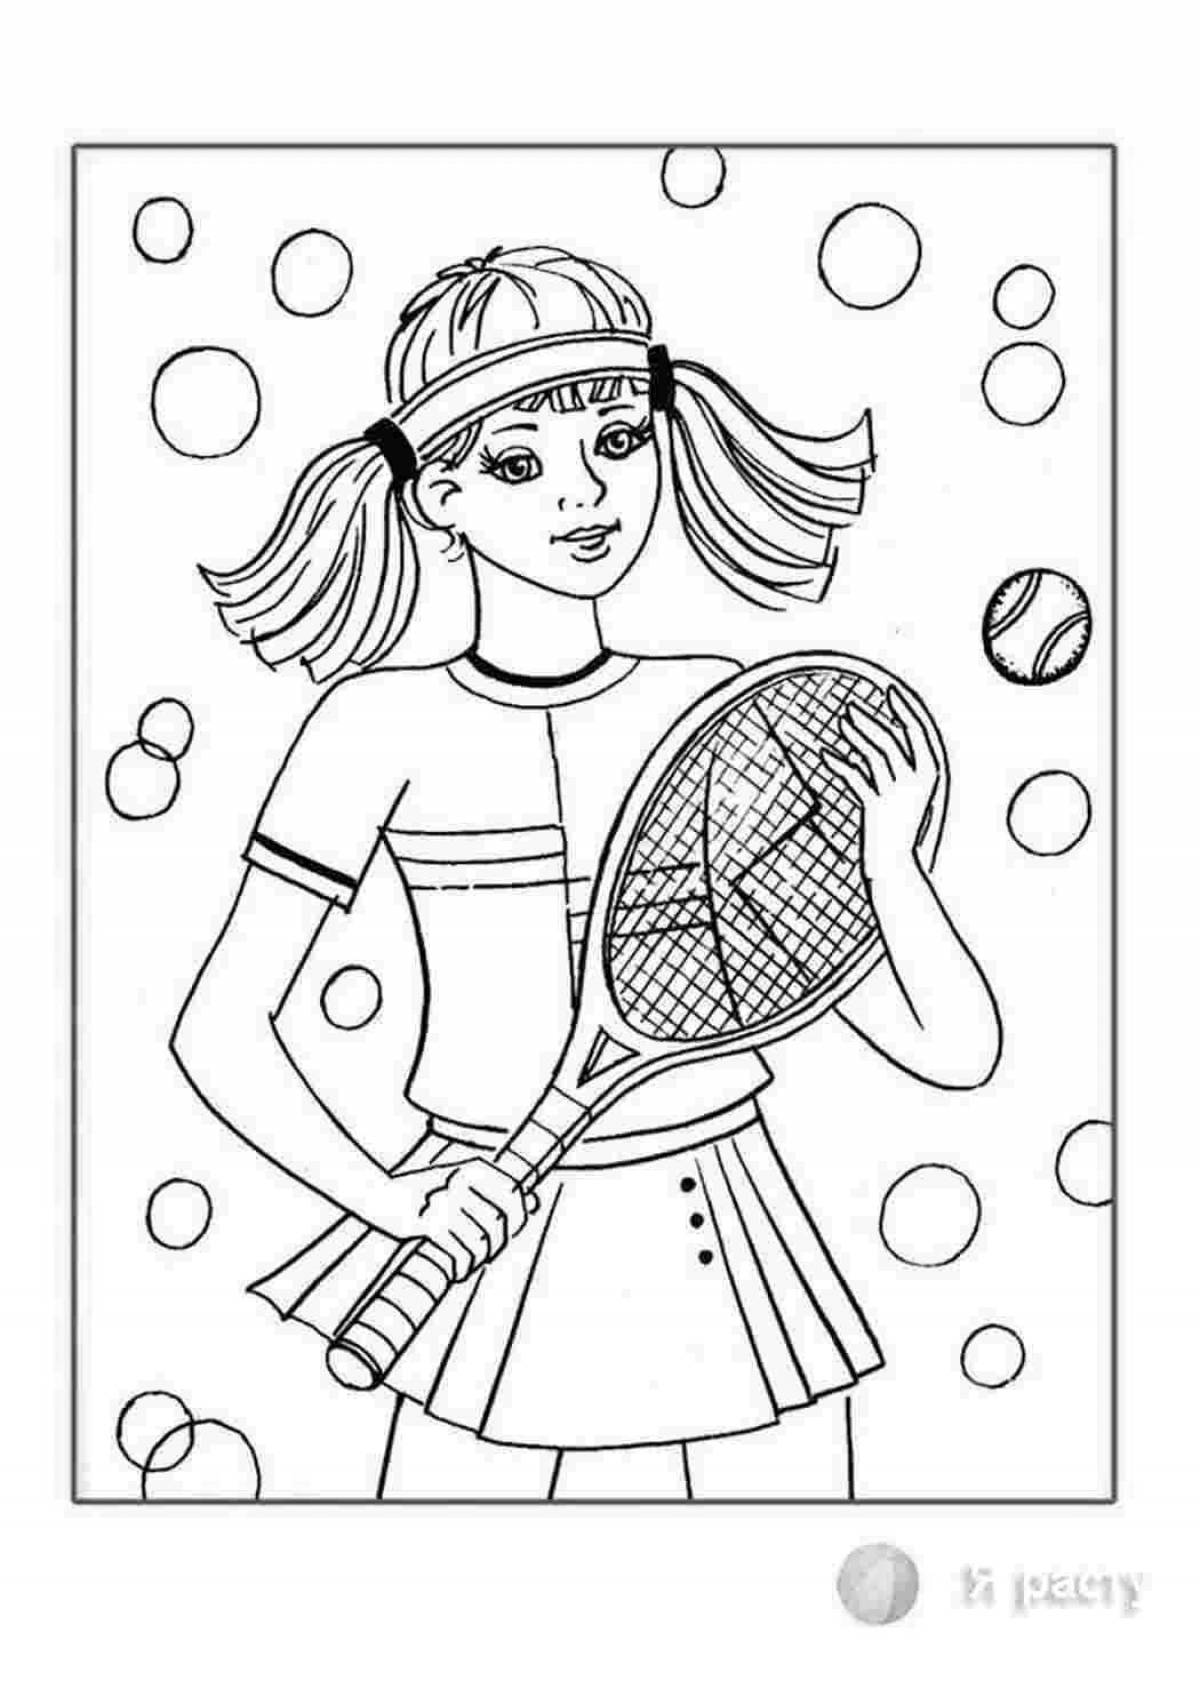 Incredible sports coloring book for kids 6-7 years old